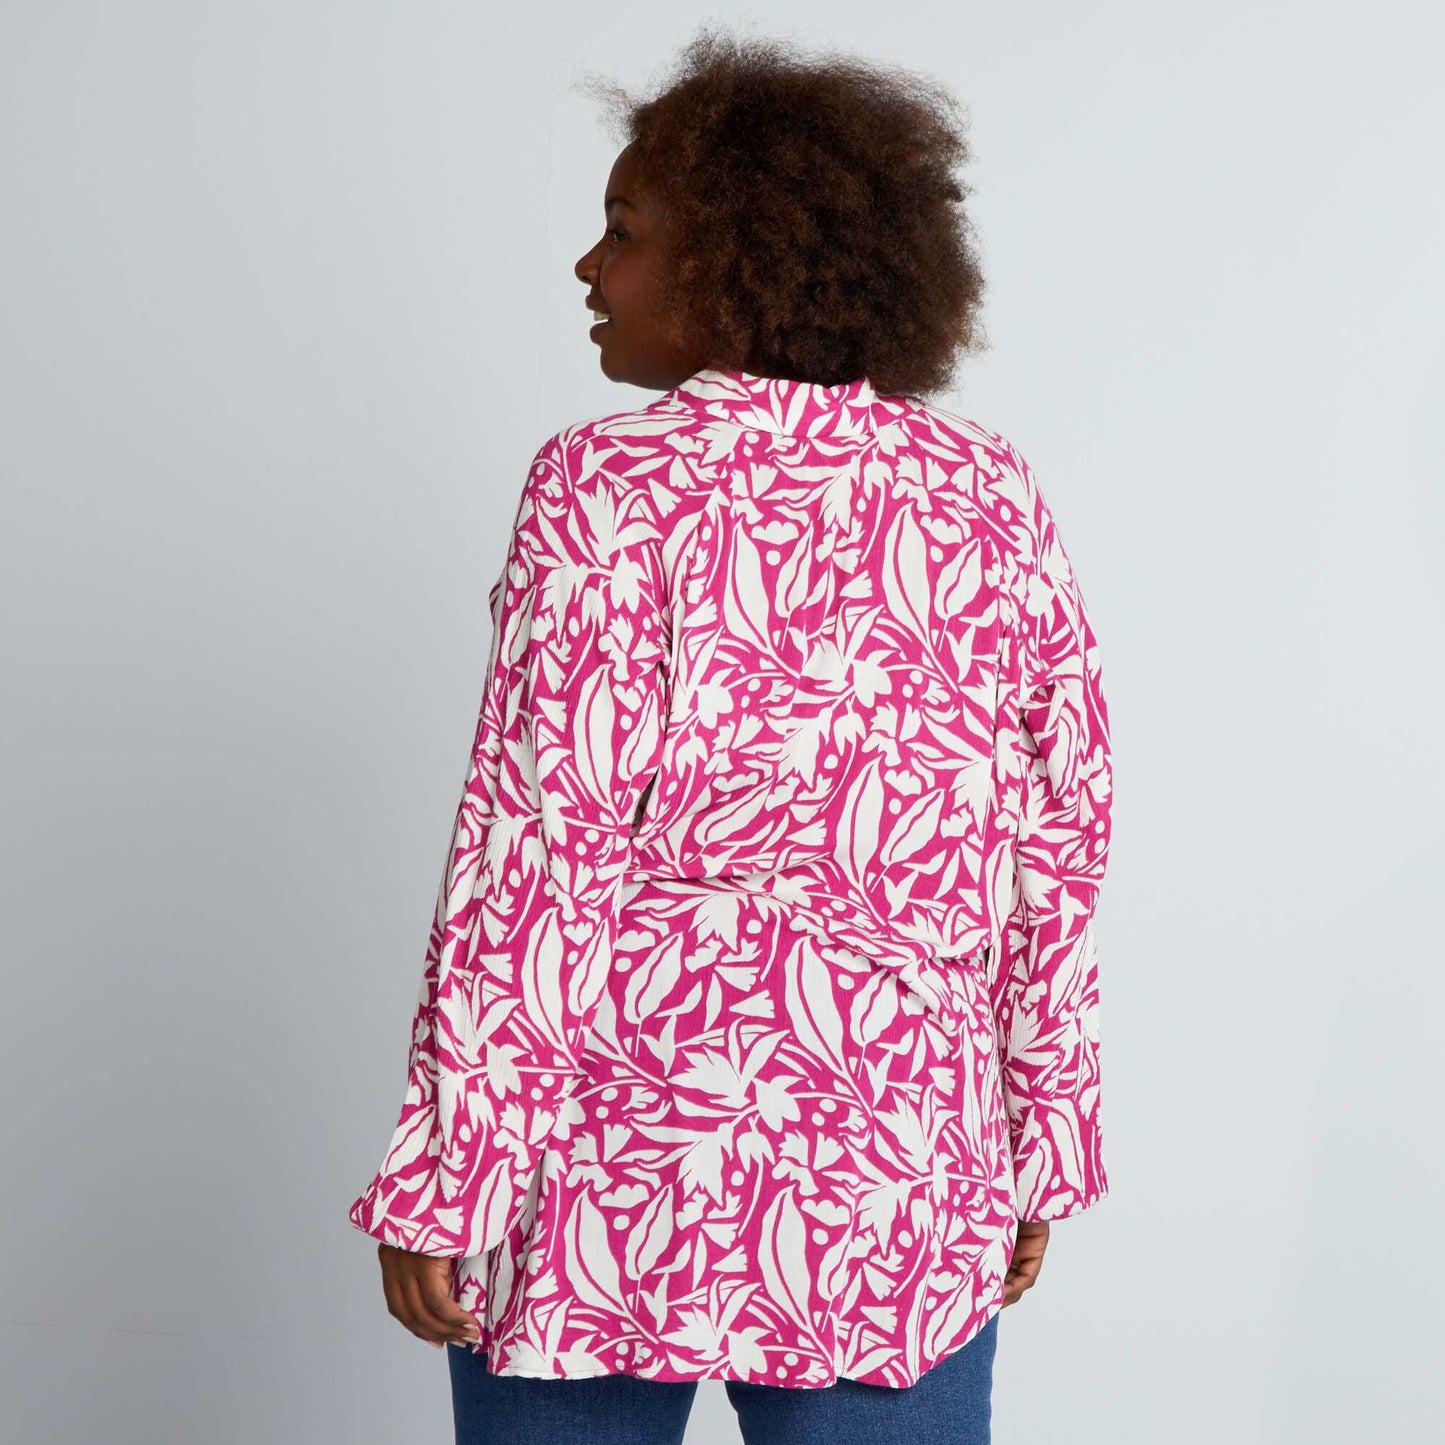 Flowing printed blouse with puff sleeves PINK